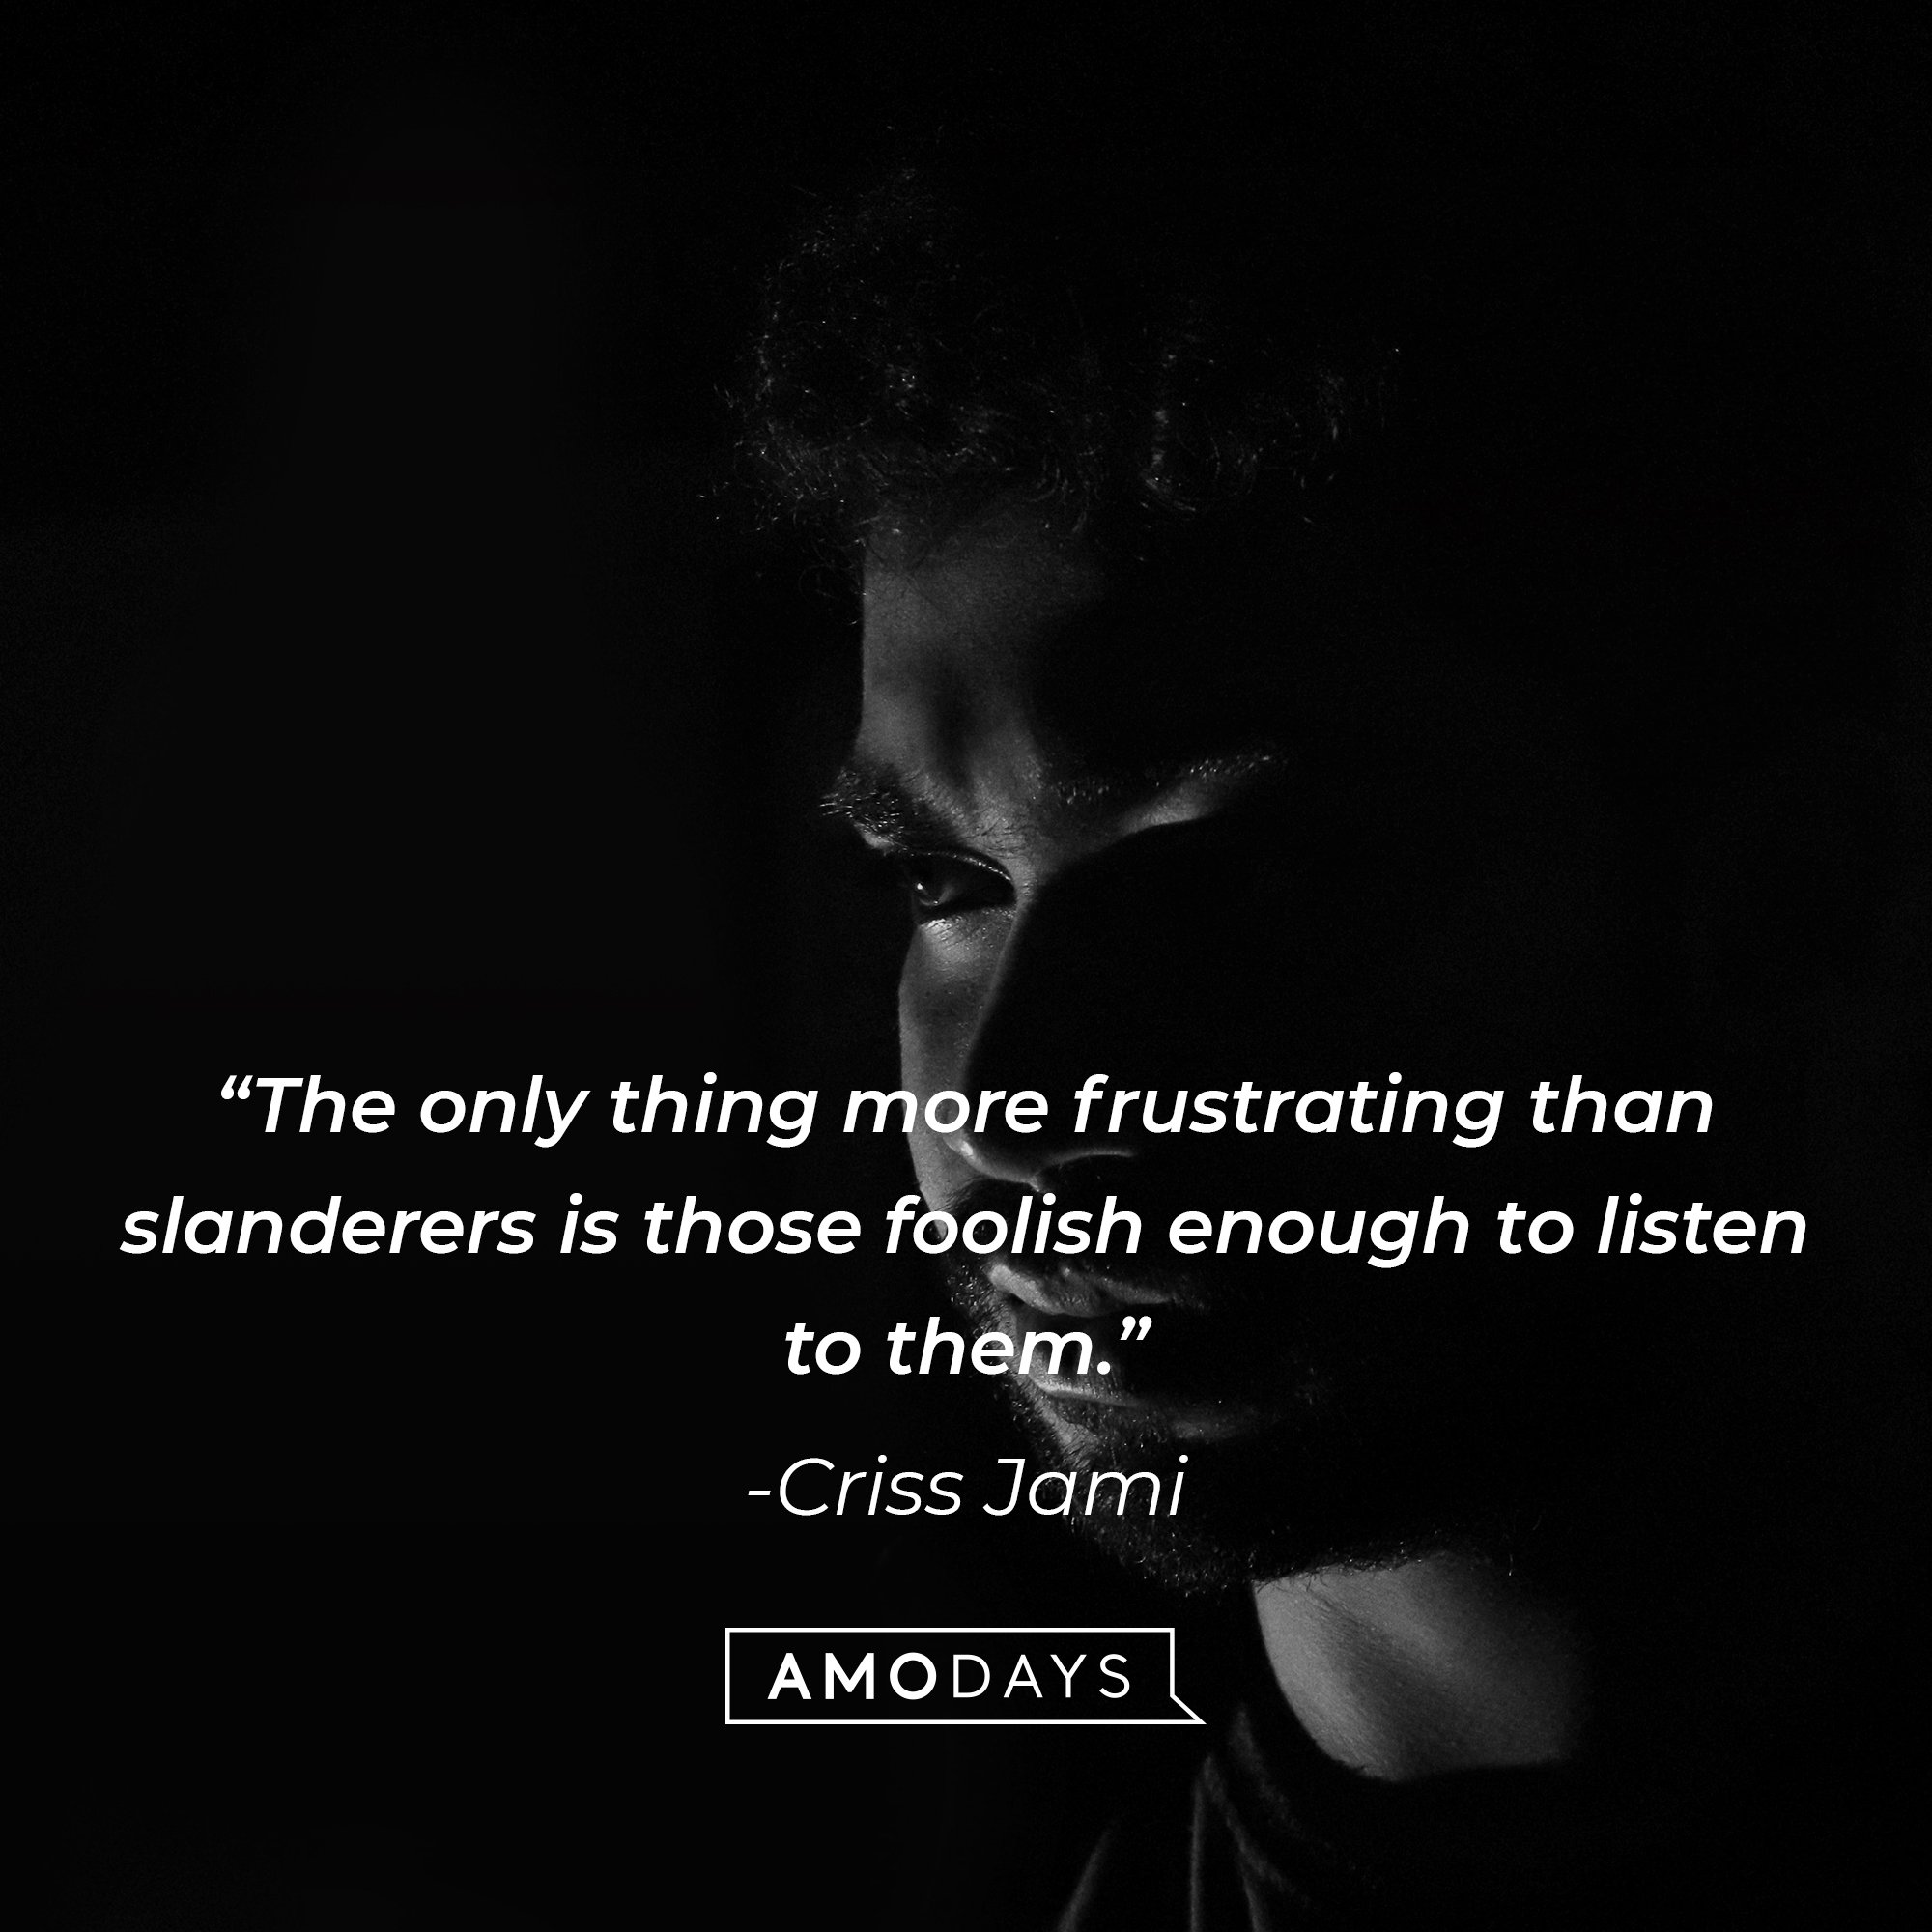 Criss Jami’s quote: “The only thing more frustrating than slanderers is those foolish enough to listen to them.” | Image: Amodays   